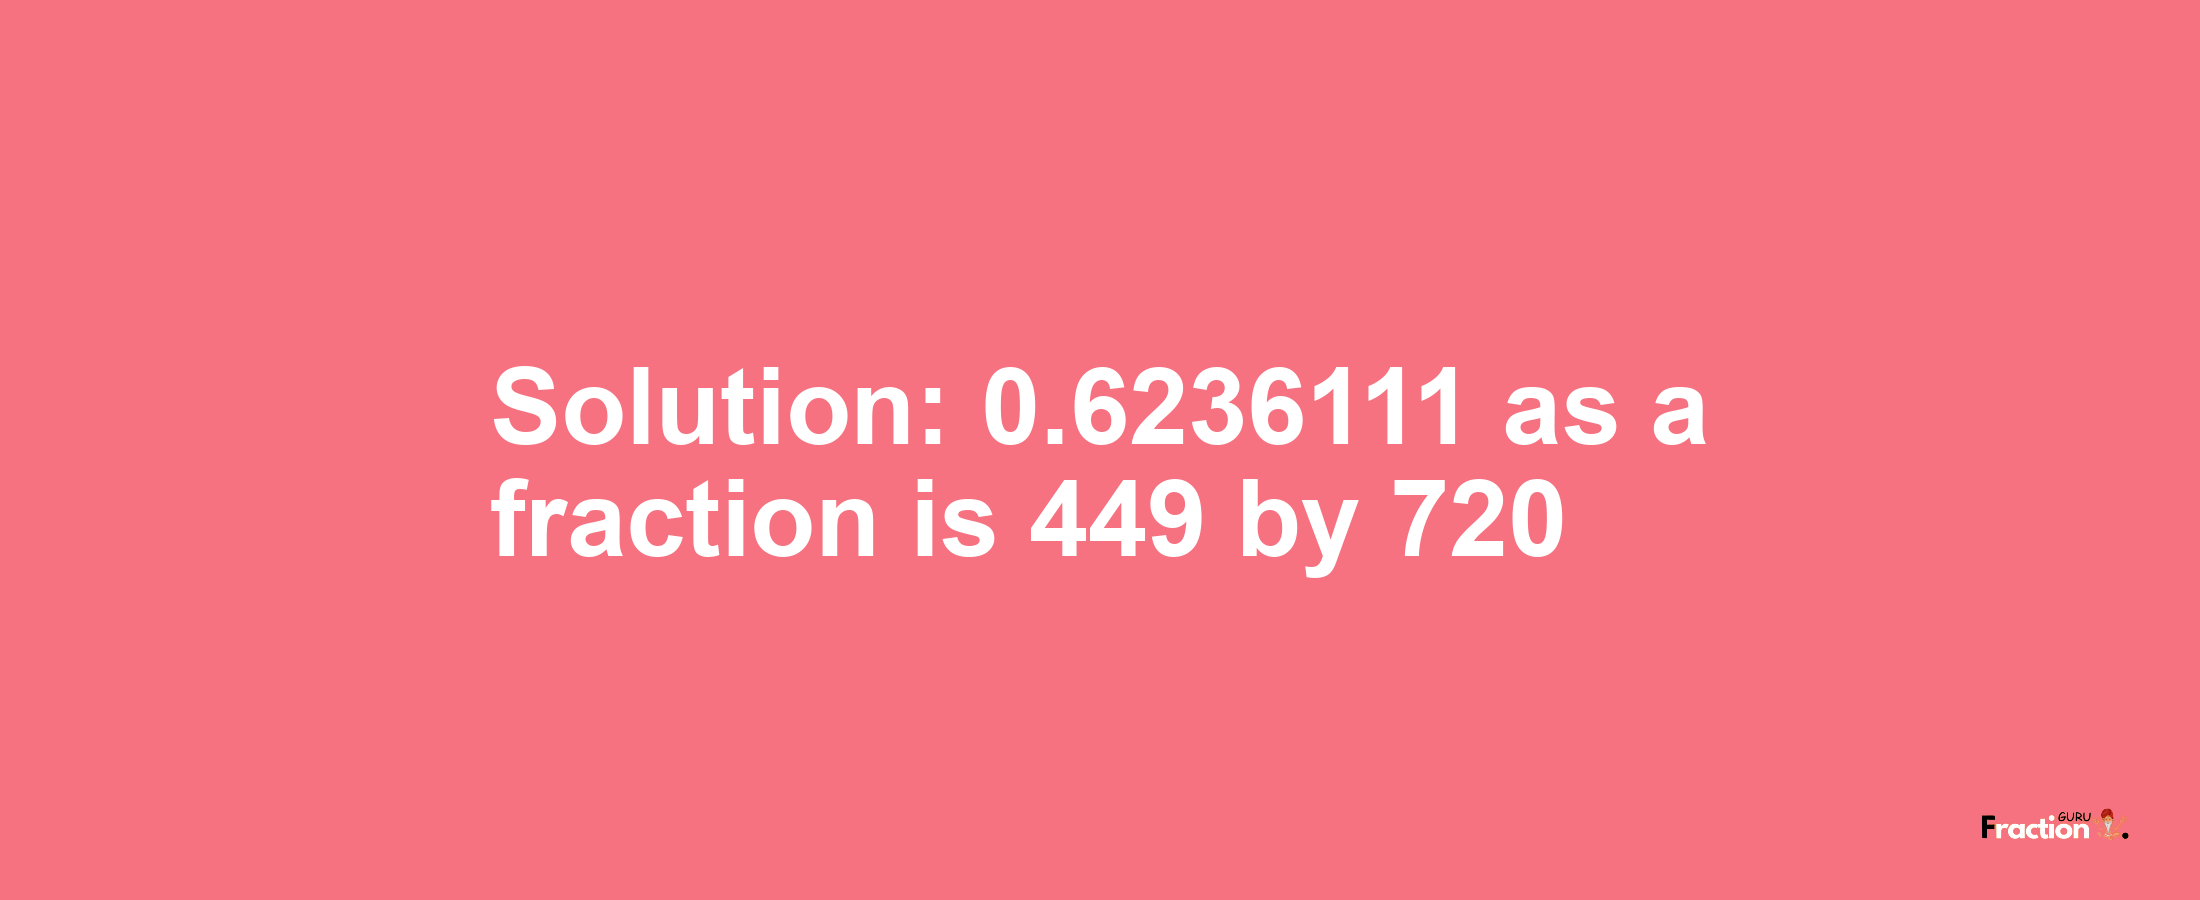 Solution:0.6236111 as a fraction is 449/720